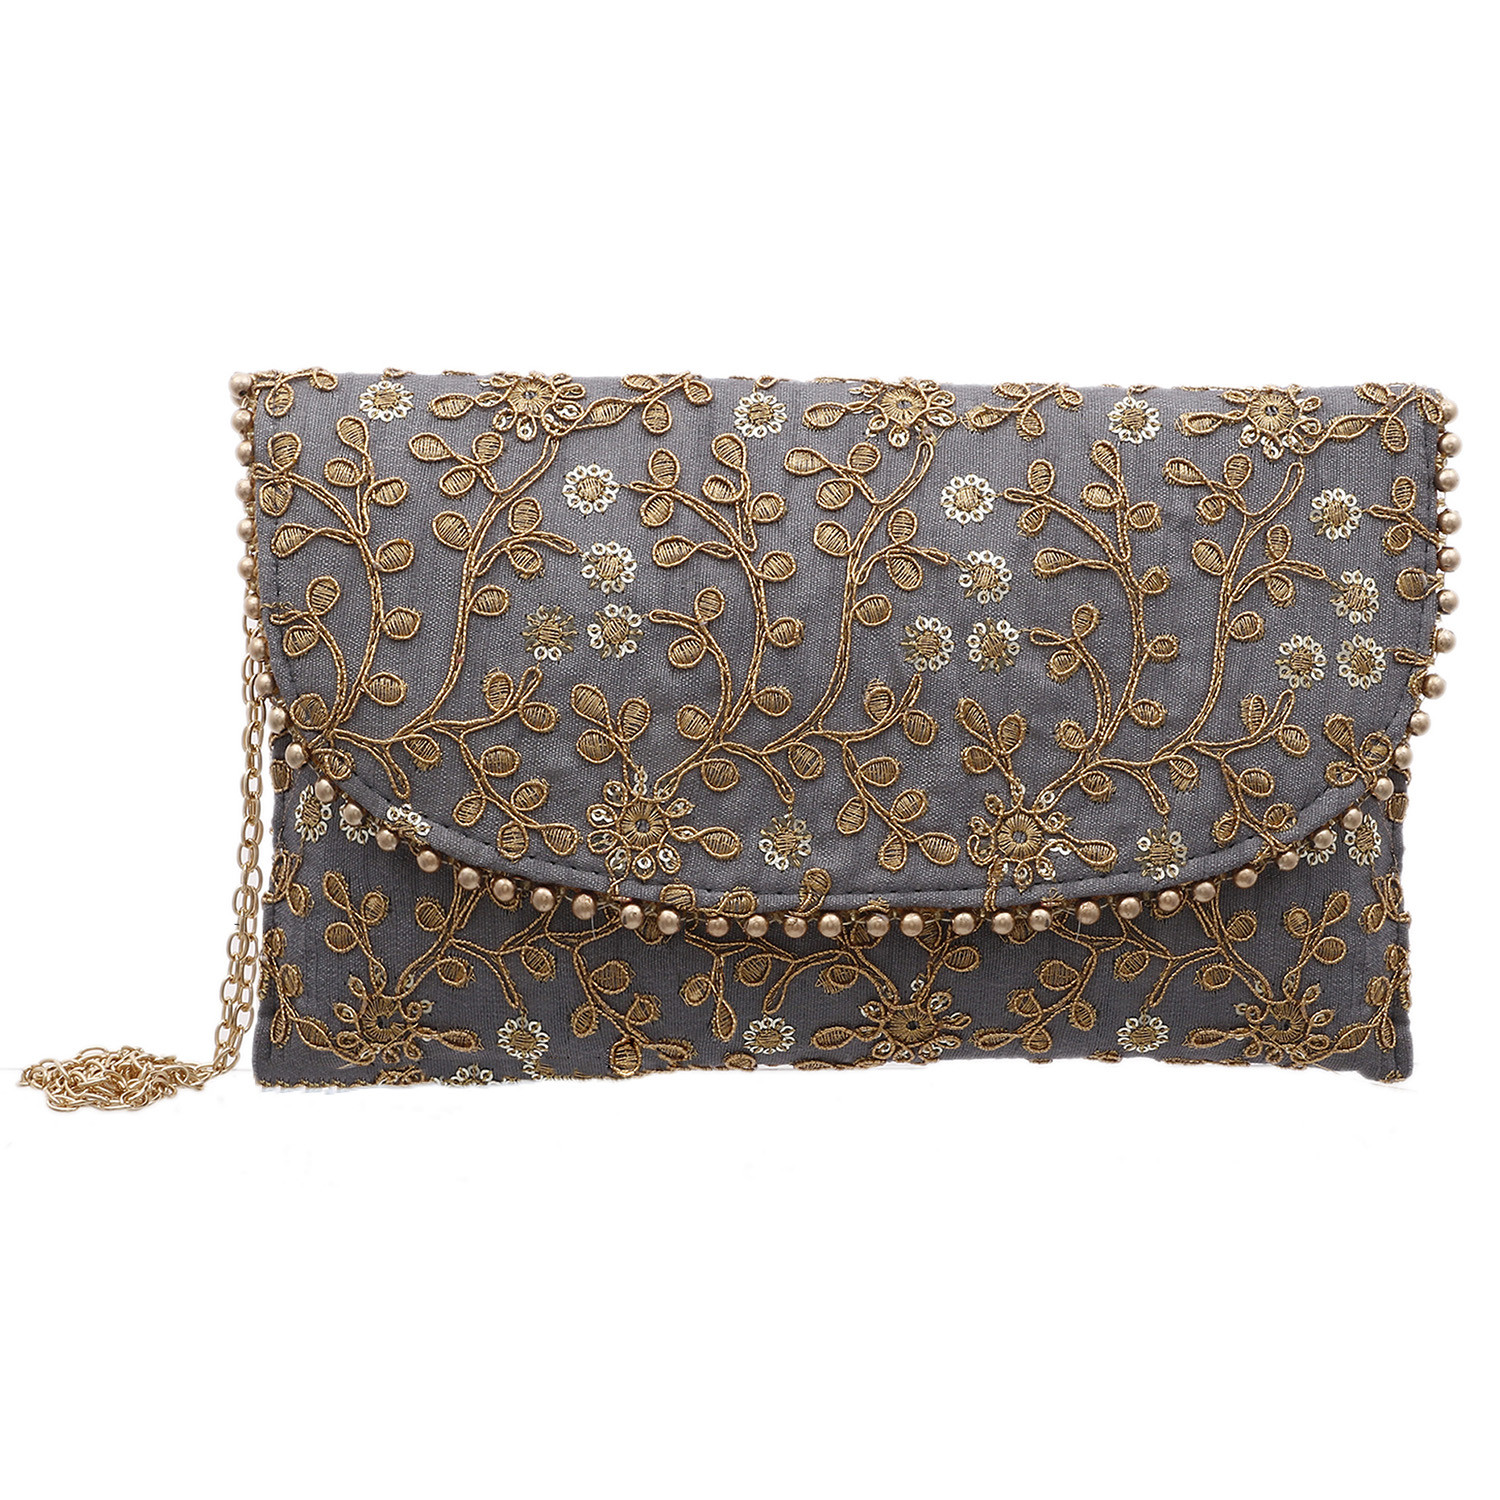 Kuber Industries Embroidery Golden Pearl Border Clutch|Hand Purse & Pearls Handle With Magnetic Lock For Woman,Girls (Gray)